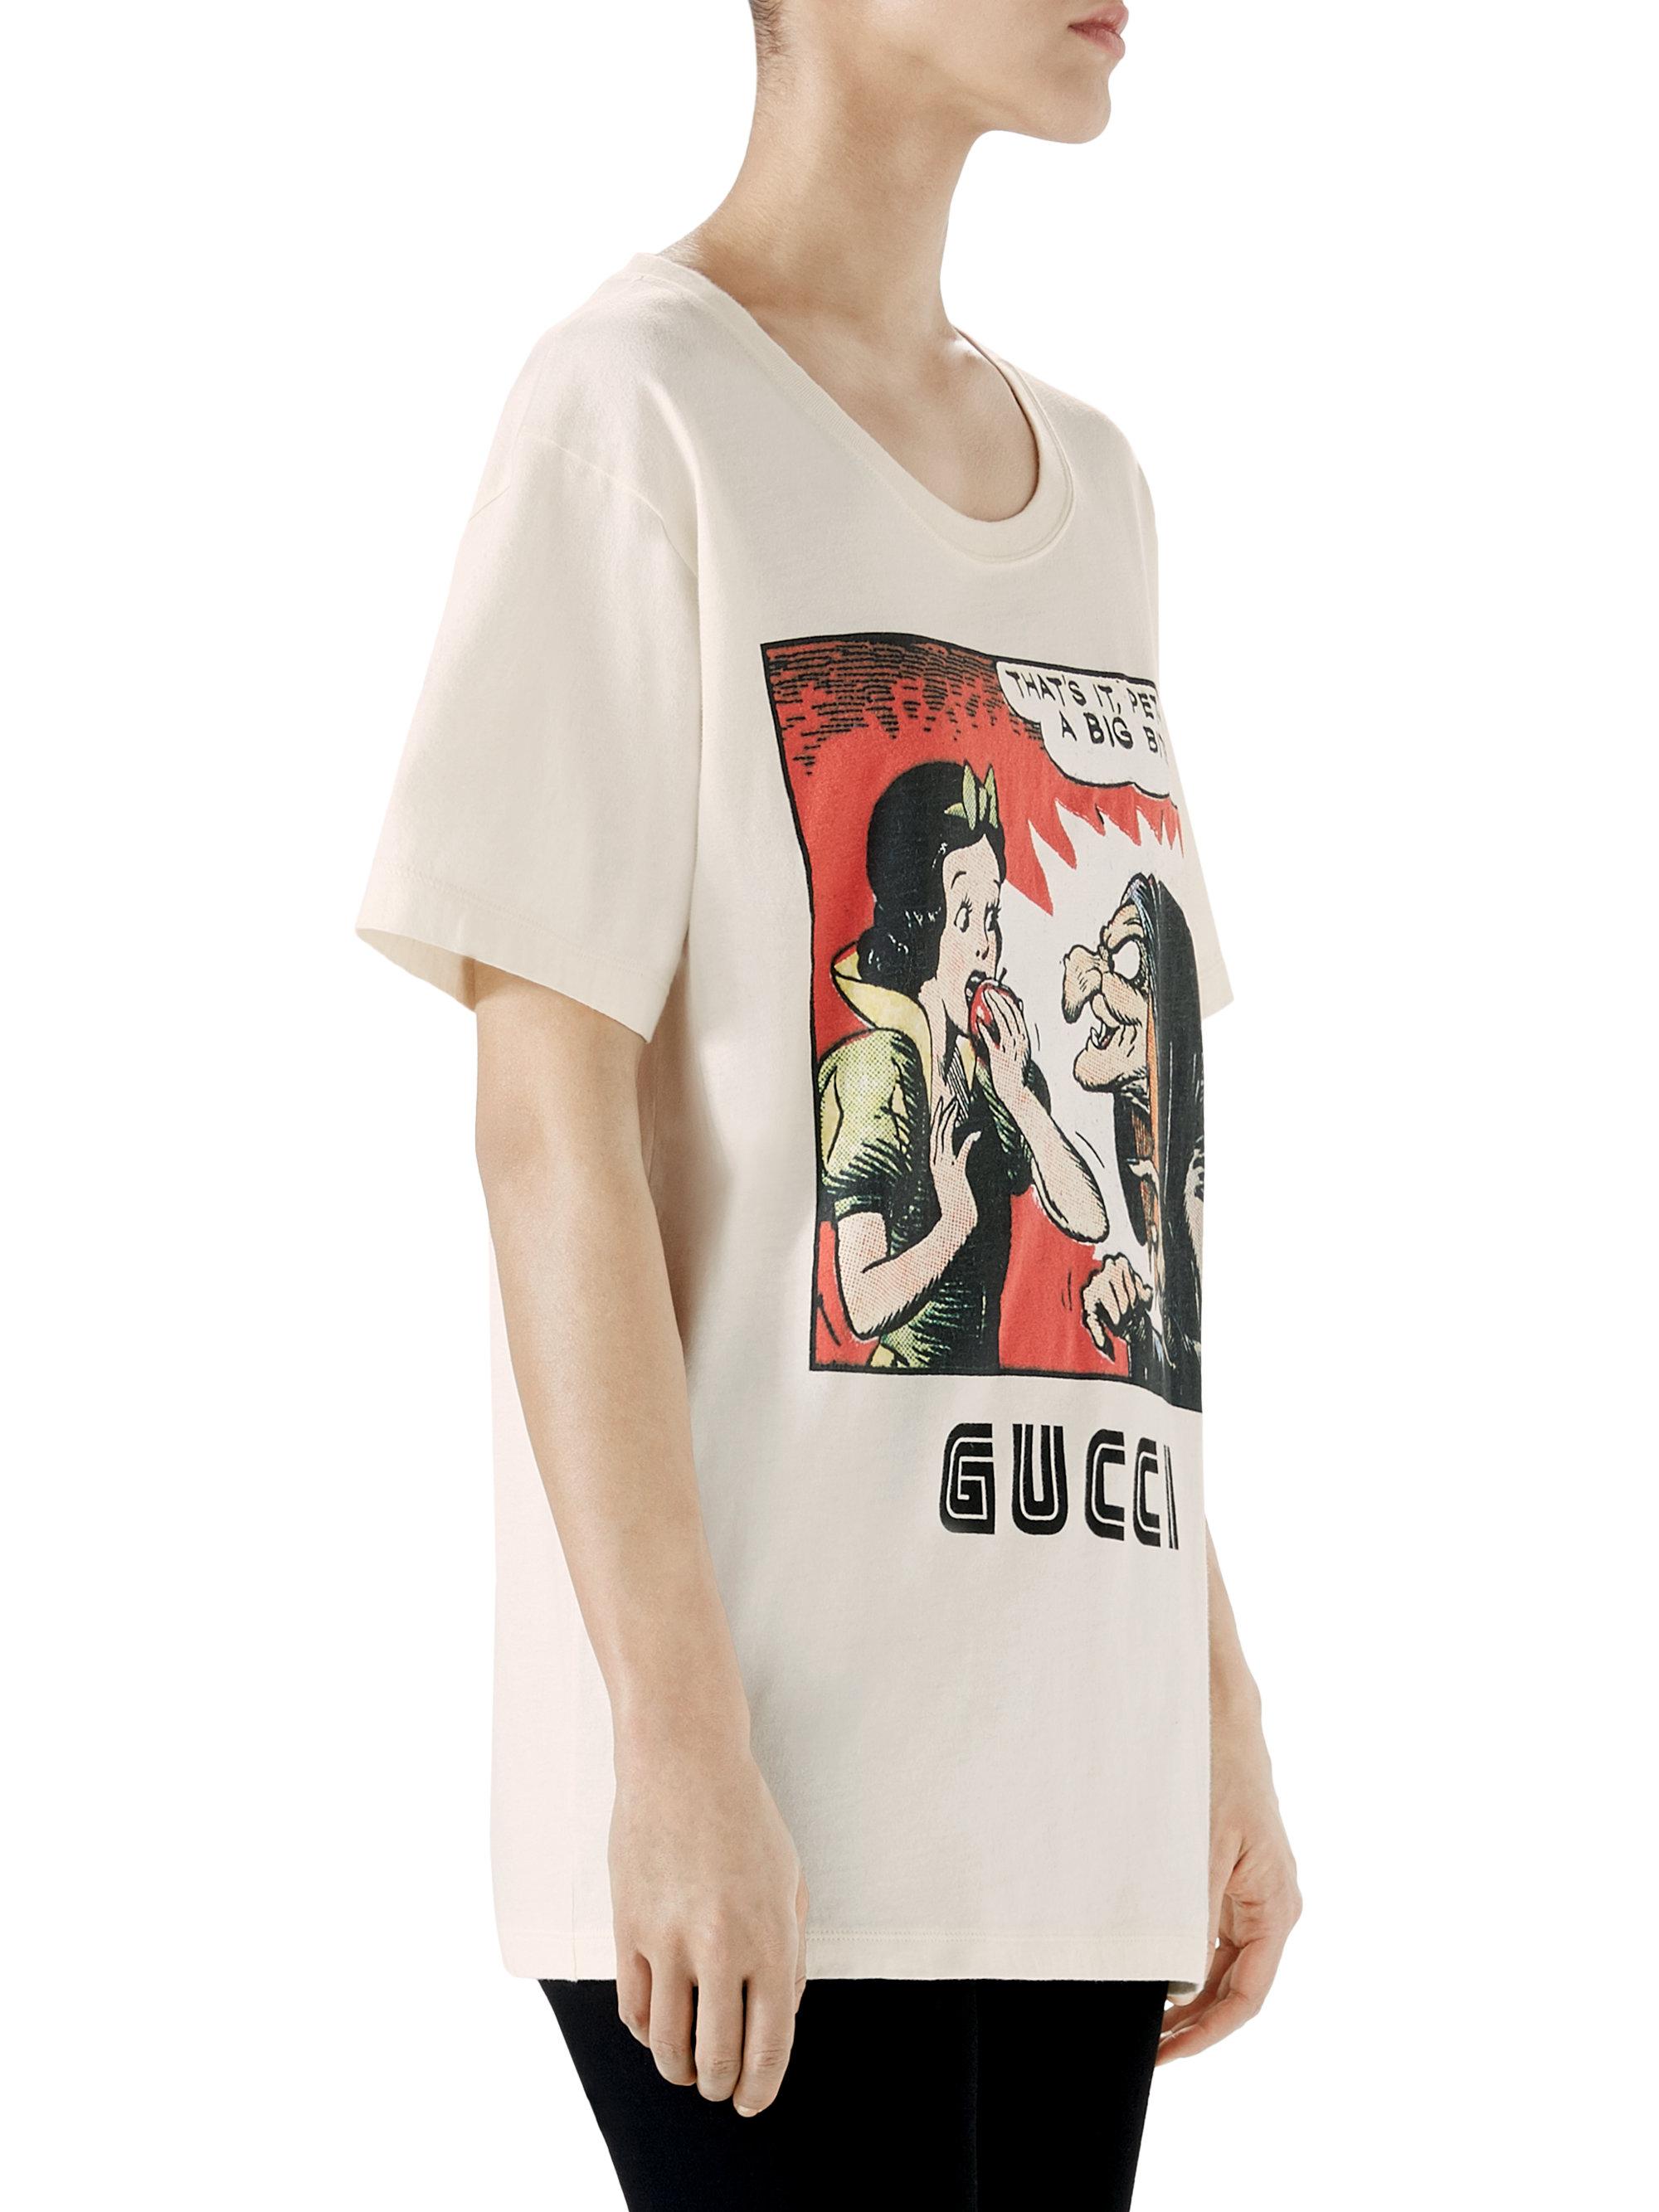 gucci magnetismo t shirt